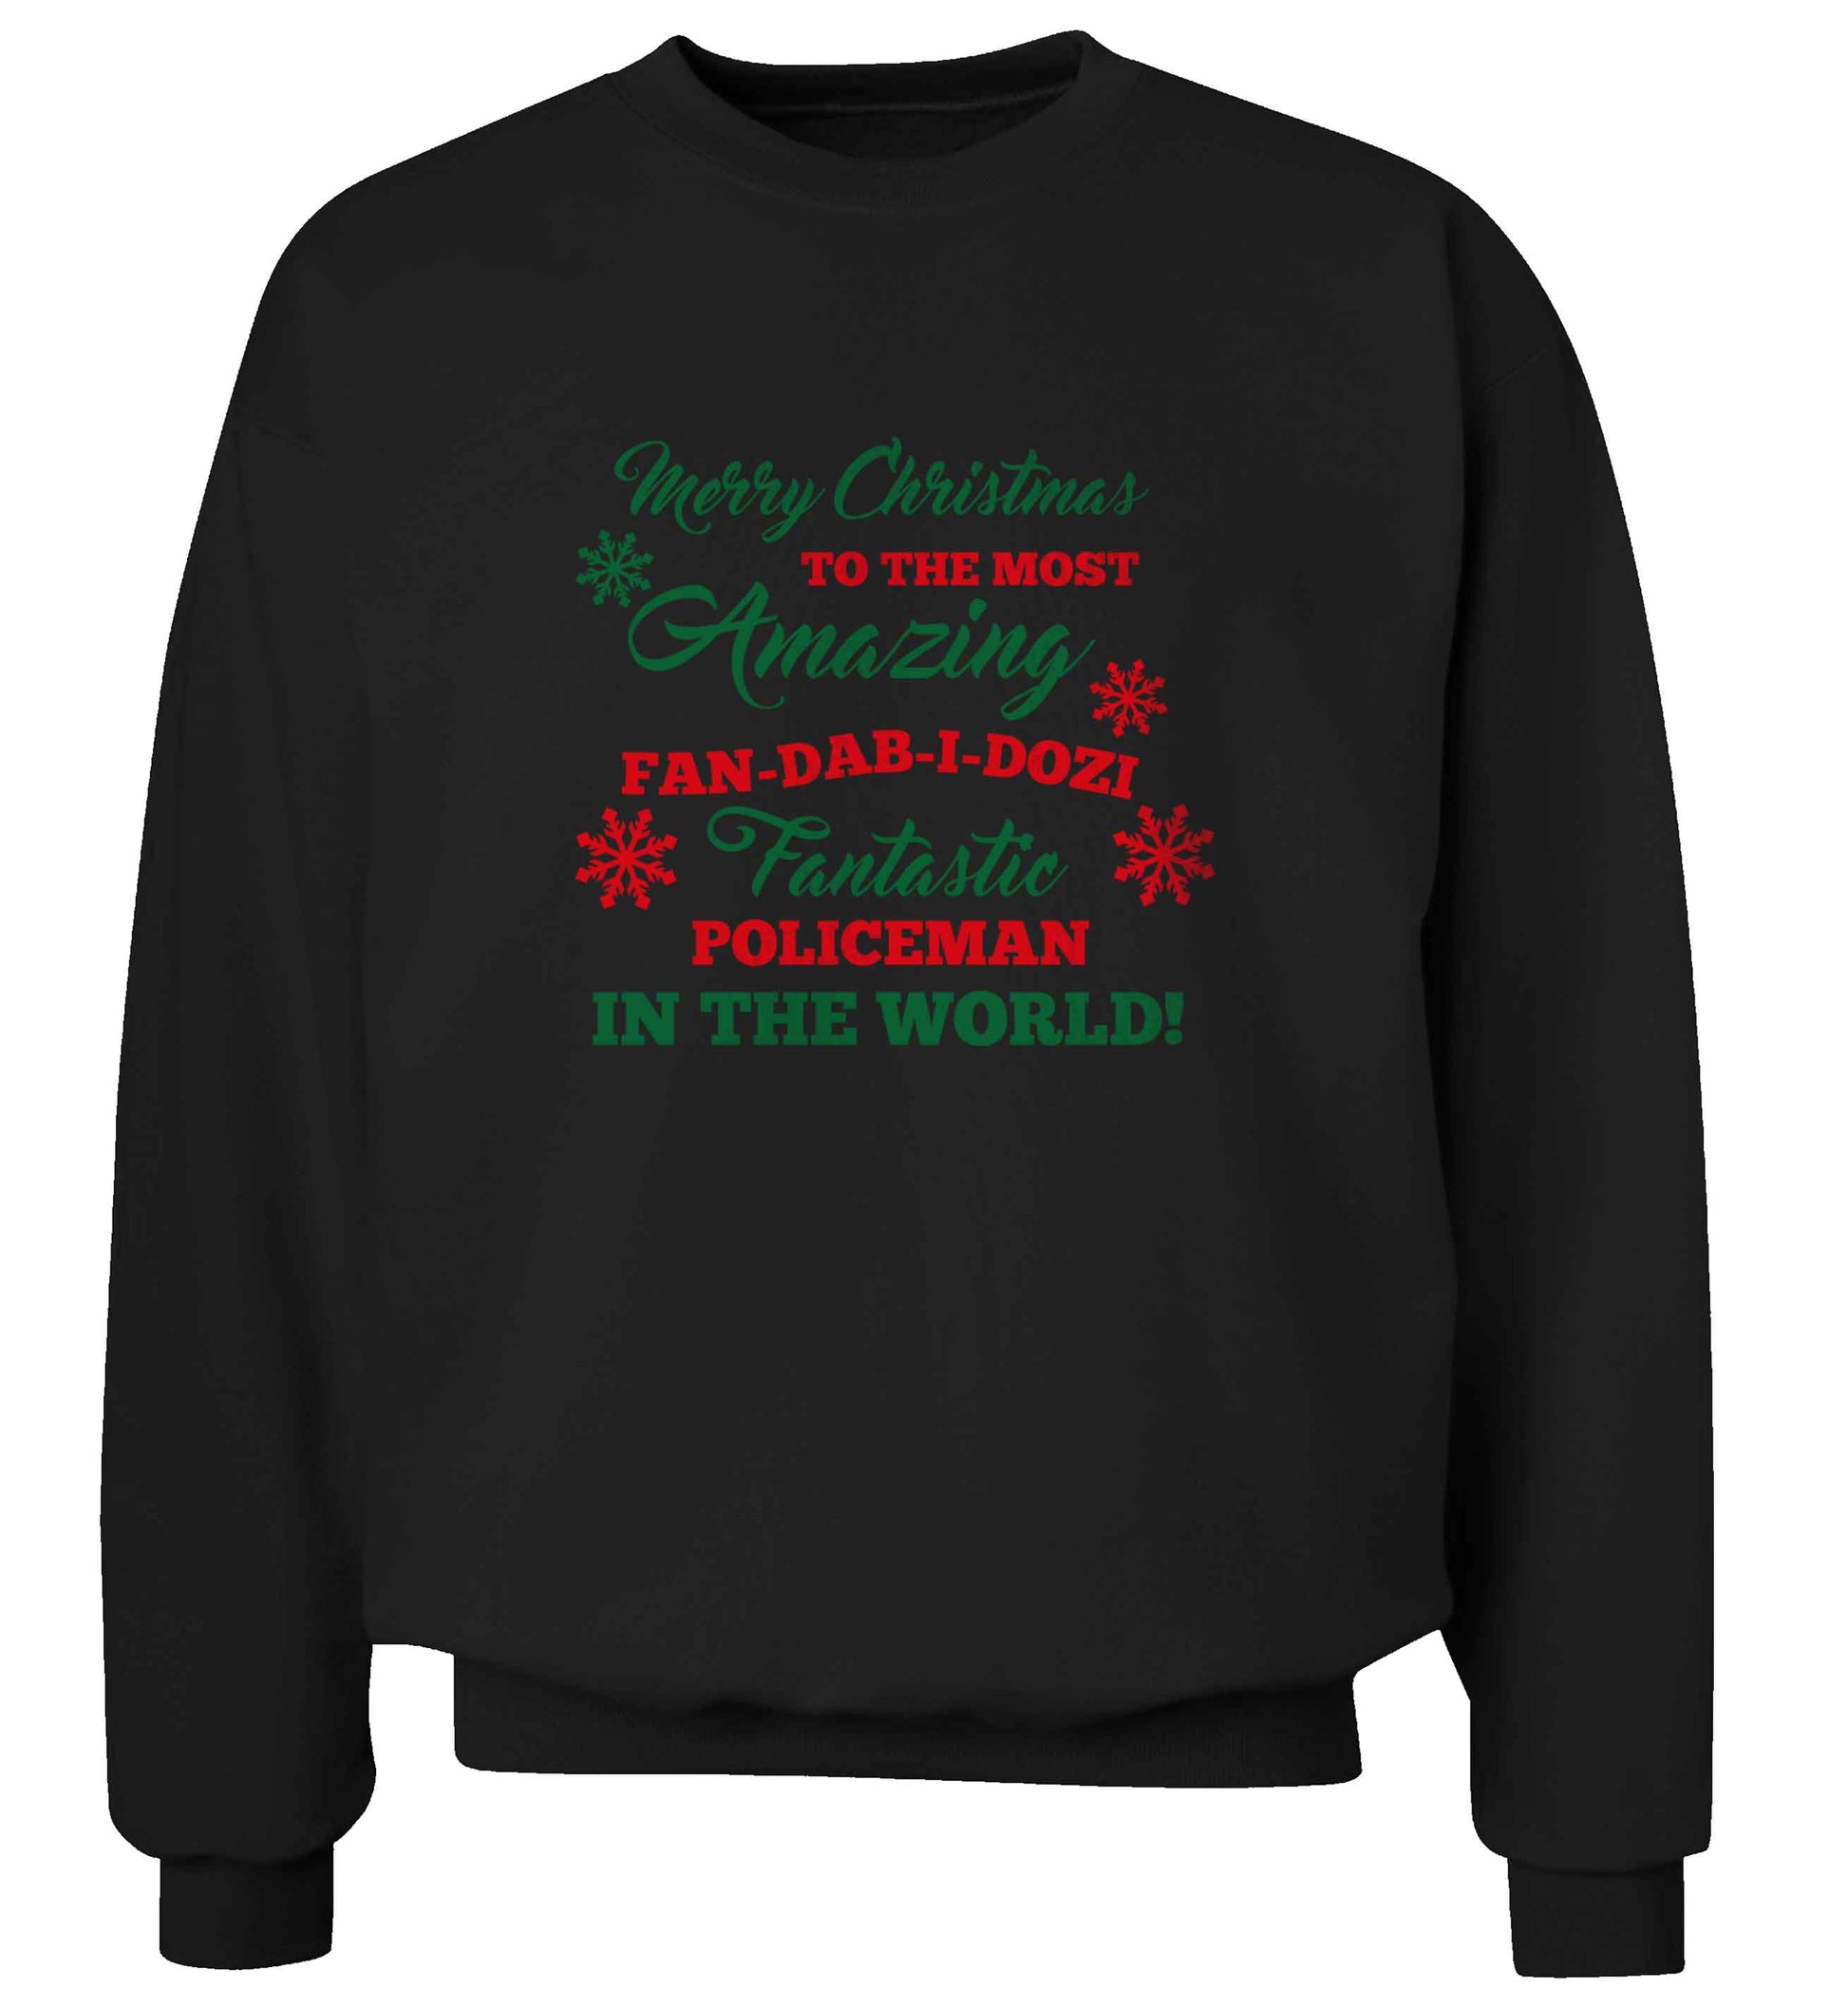 Merry Christmas to the most amazing policeman in the world! adult's unisex black sweater 2XL